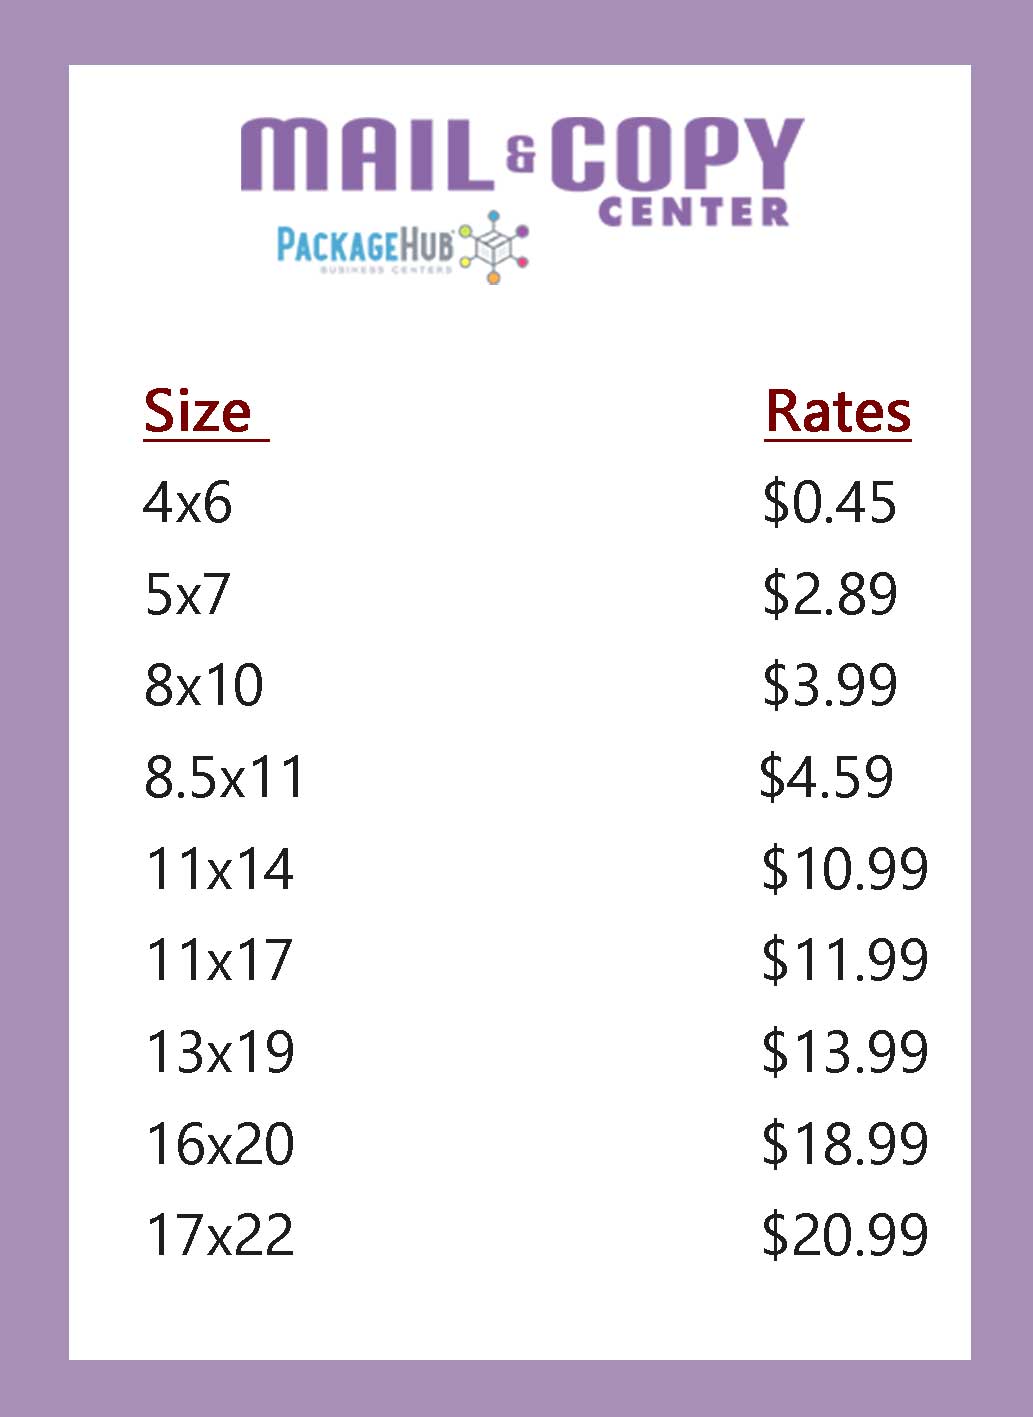 Photo prinitng prices at Gentilly Mail and Copy center